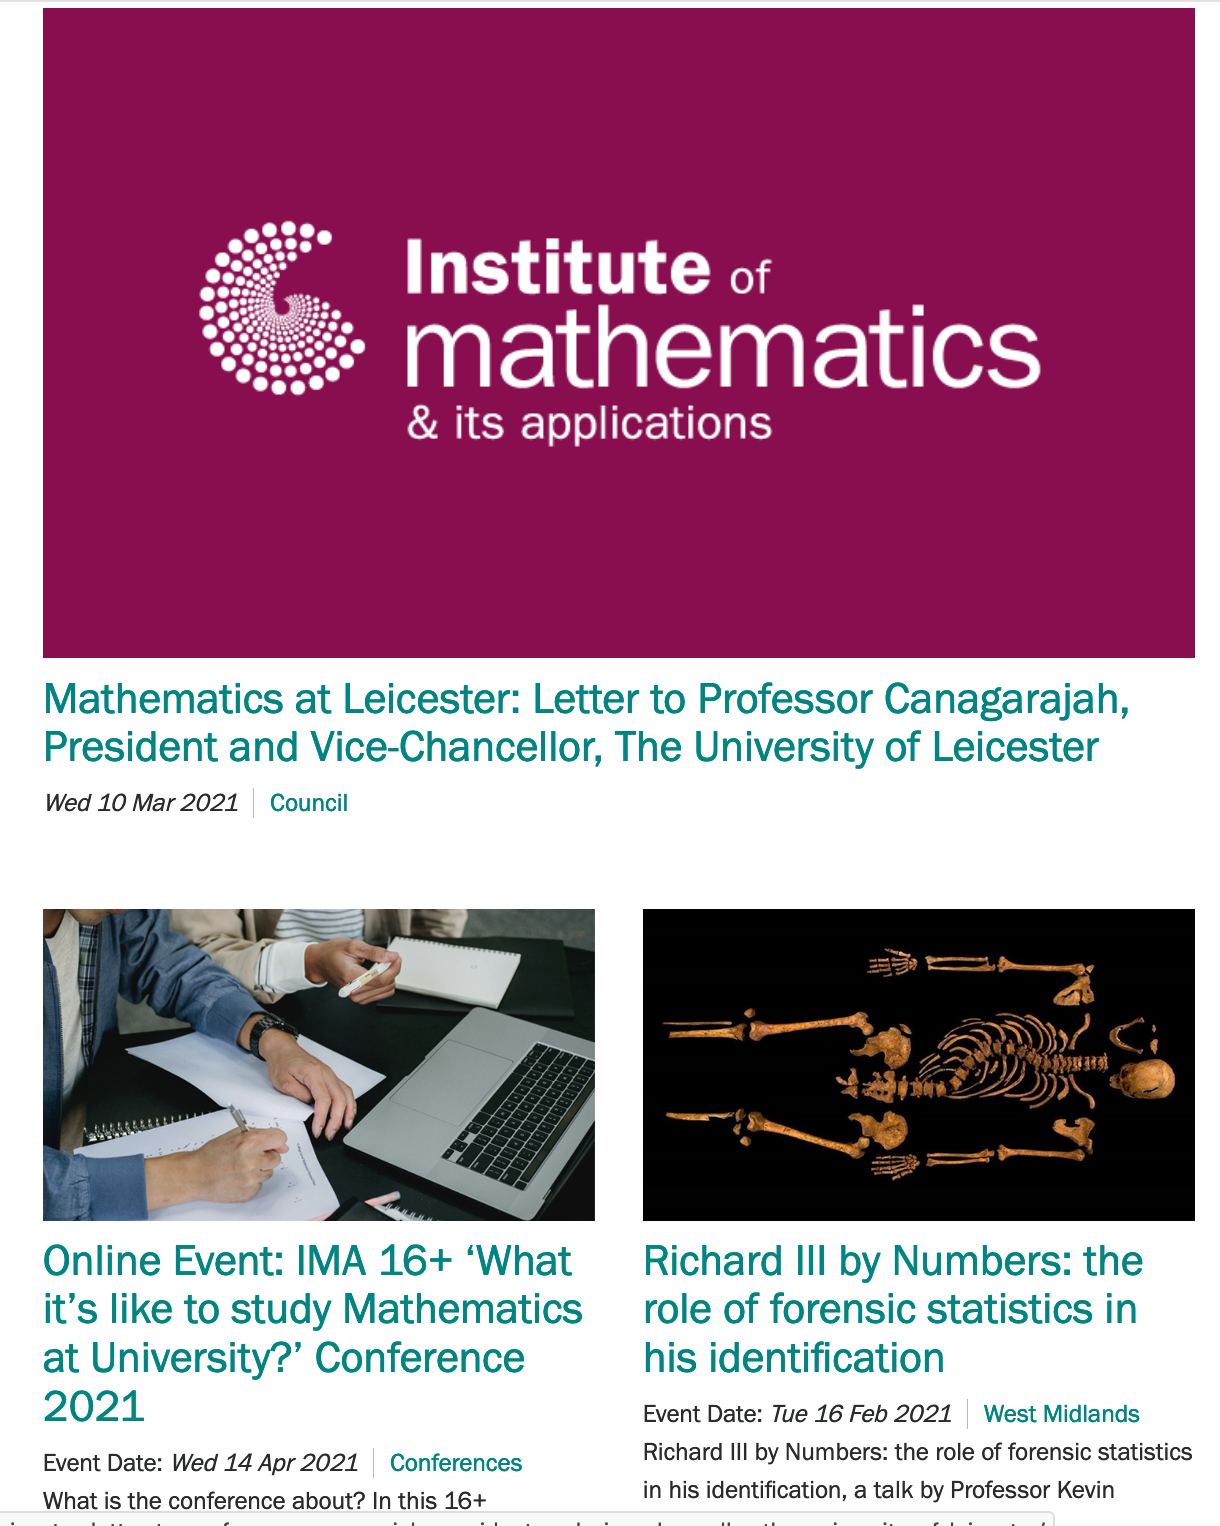 Screen grab of Institute of Mathematics webpage